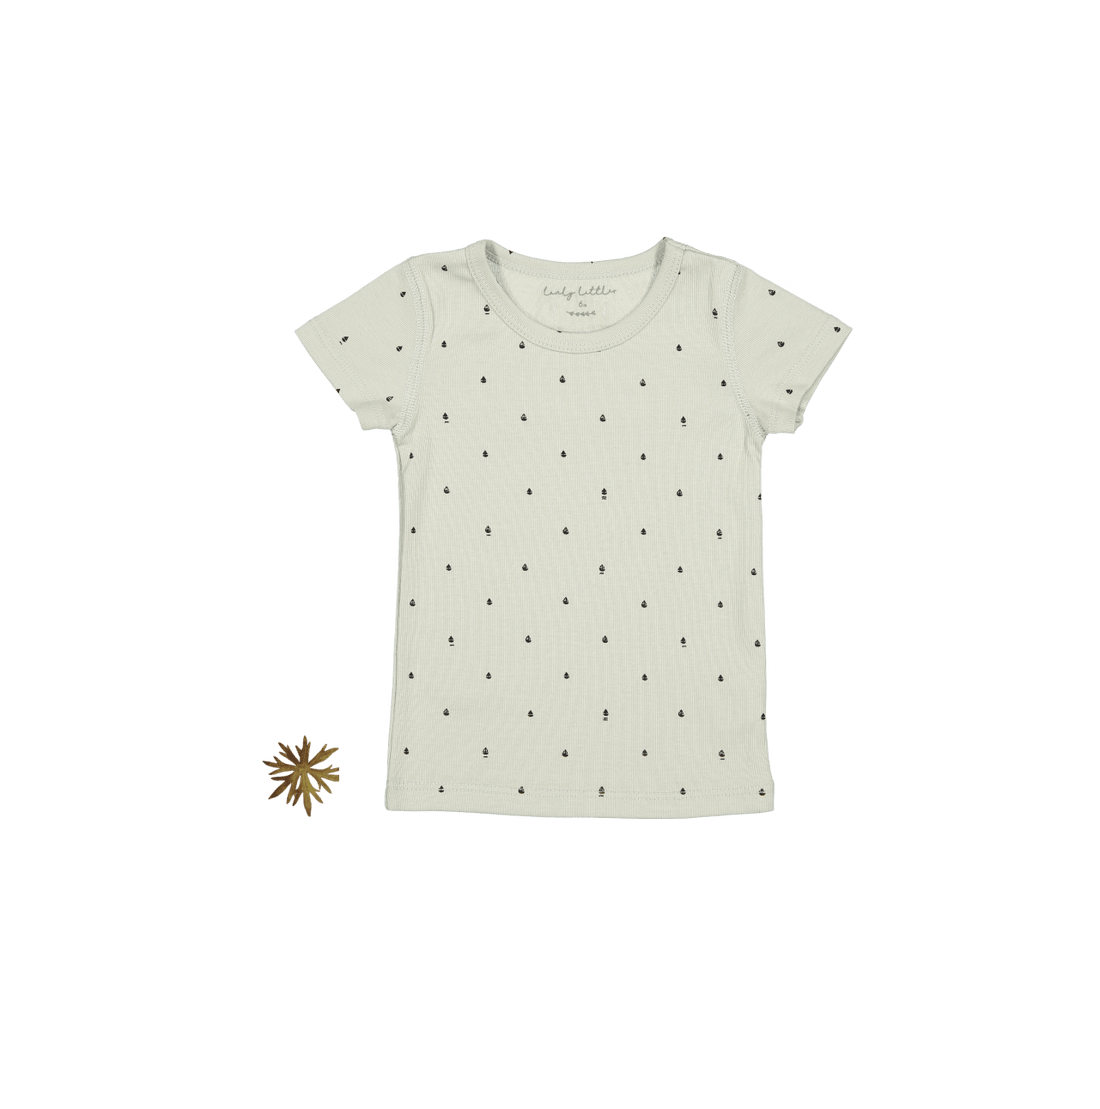 The Printed Short Sleeve Tee - Sailaway – Lovely Littles